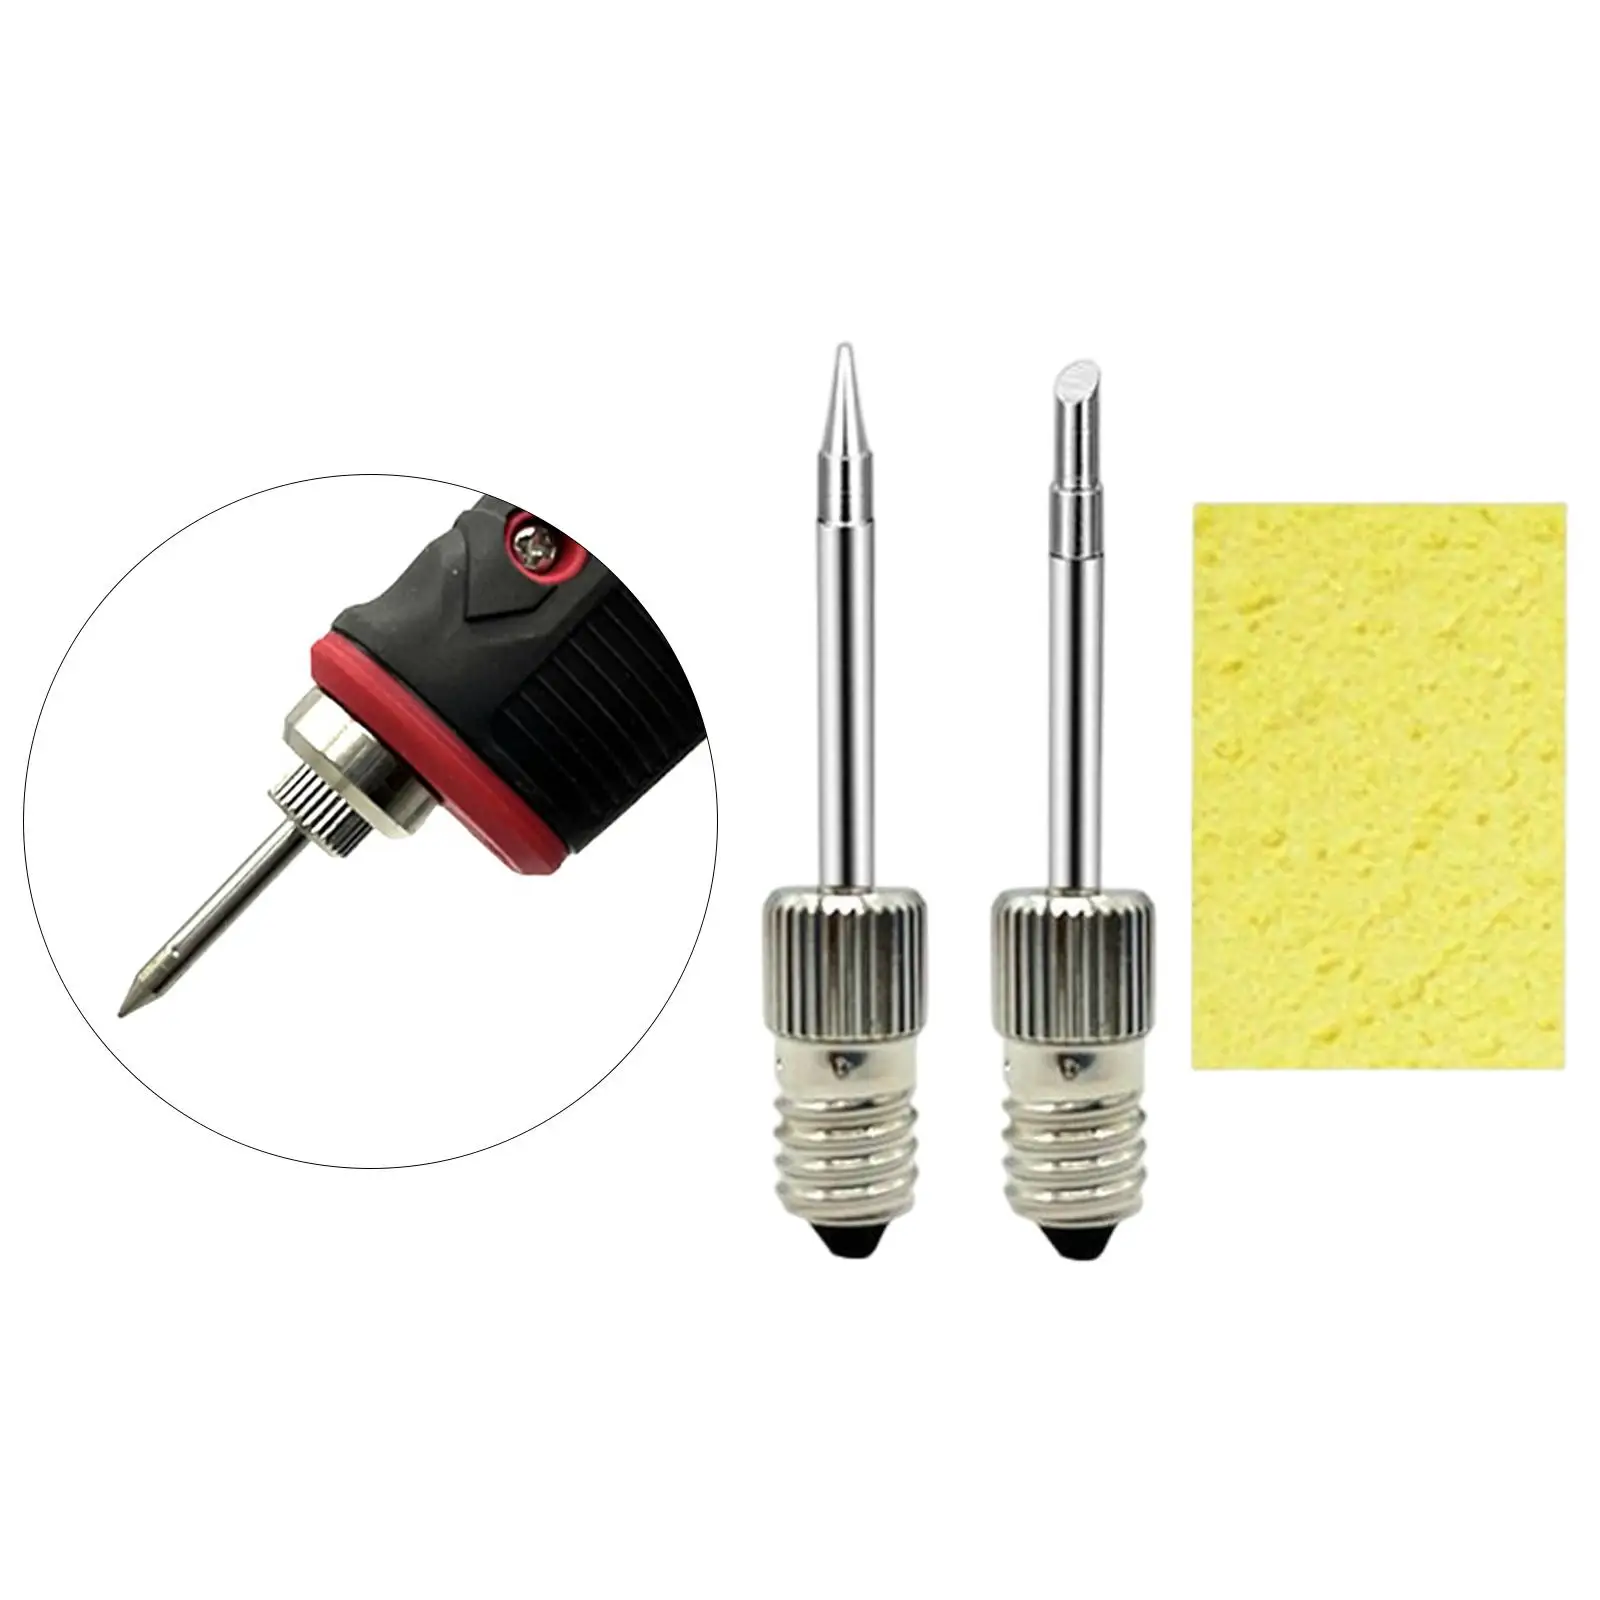 Copper Soldering Iron Tips Kit Soldering Iron Tips Replacement Parts Welding Soldering Tips for E10 Interface Soldering Station